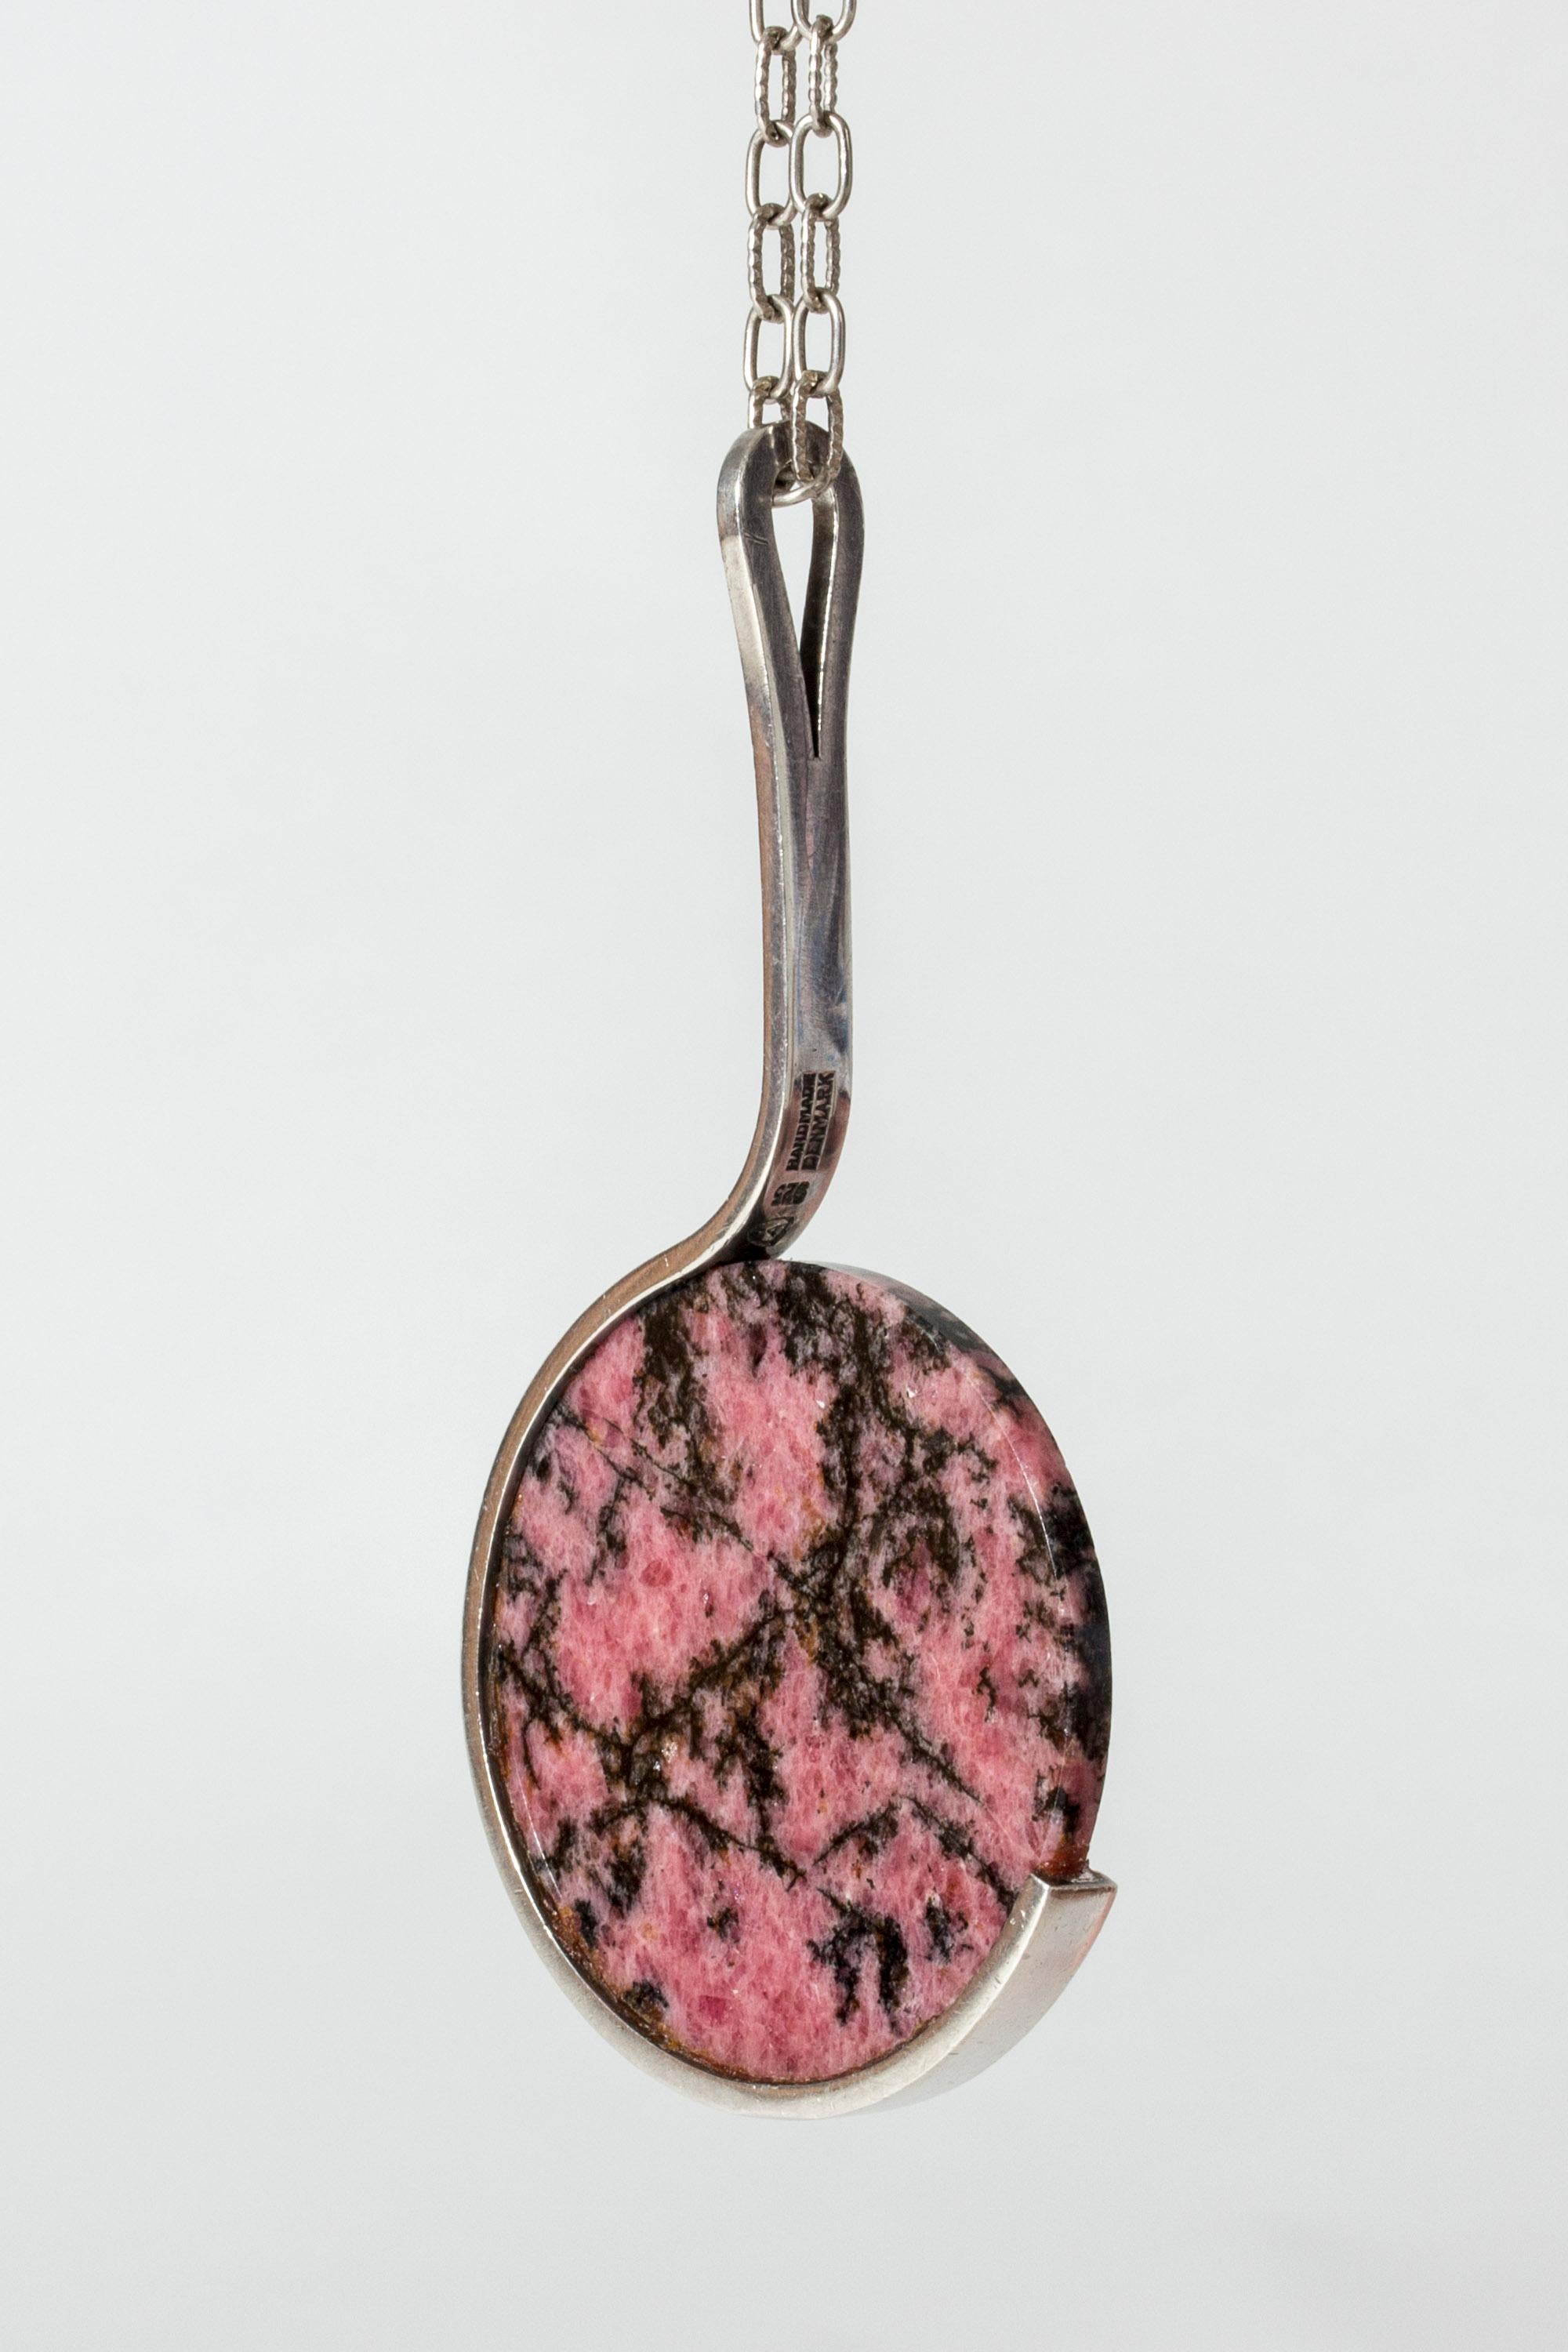 Women's or Men's Silver and Rhodonite Pendant by Jens Asby, Denmark, 1970s